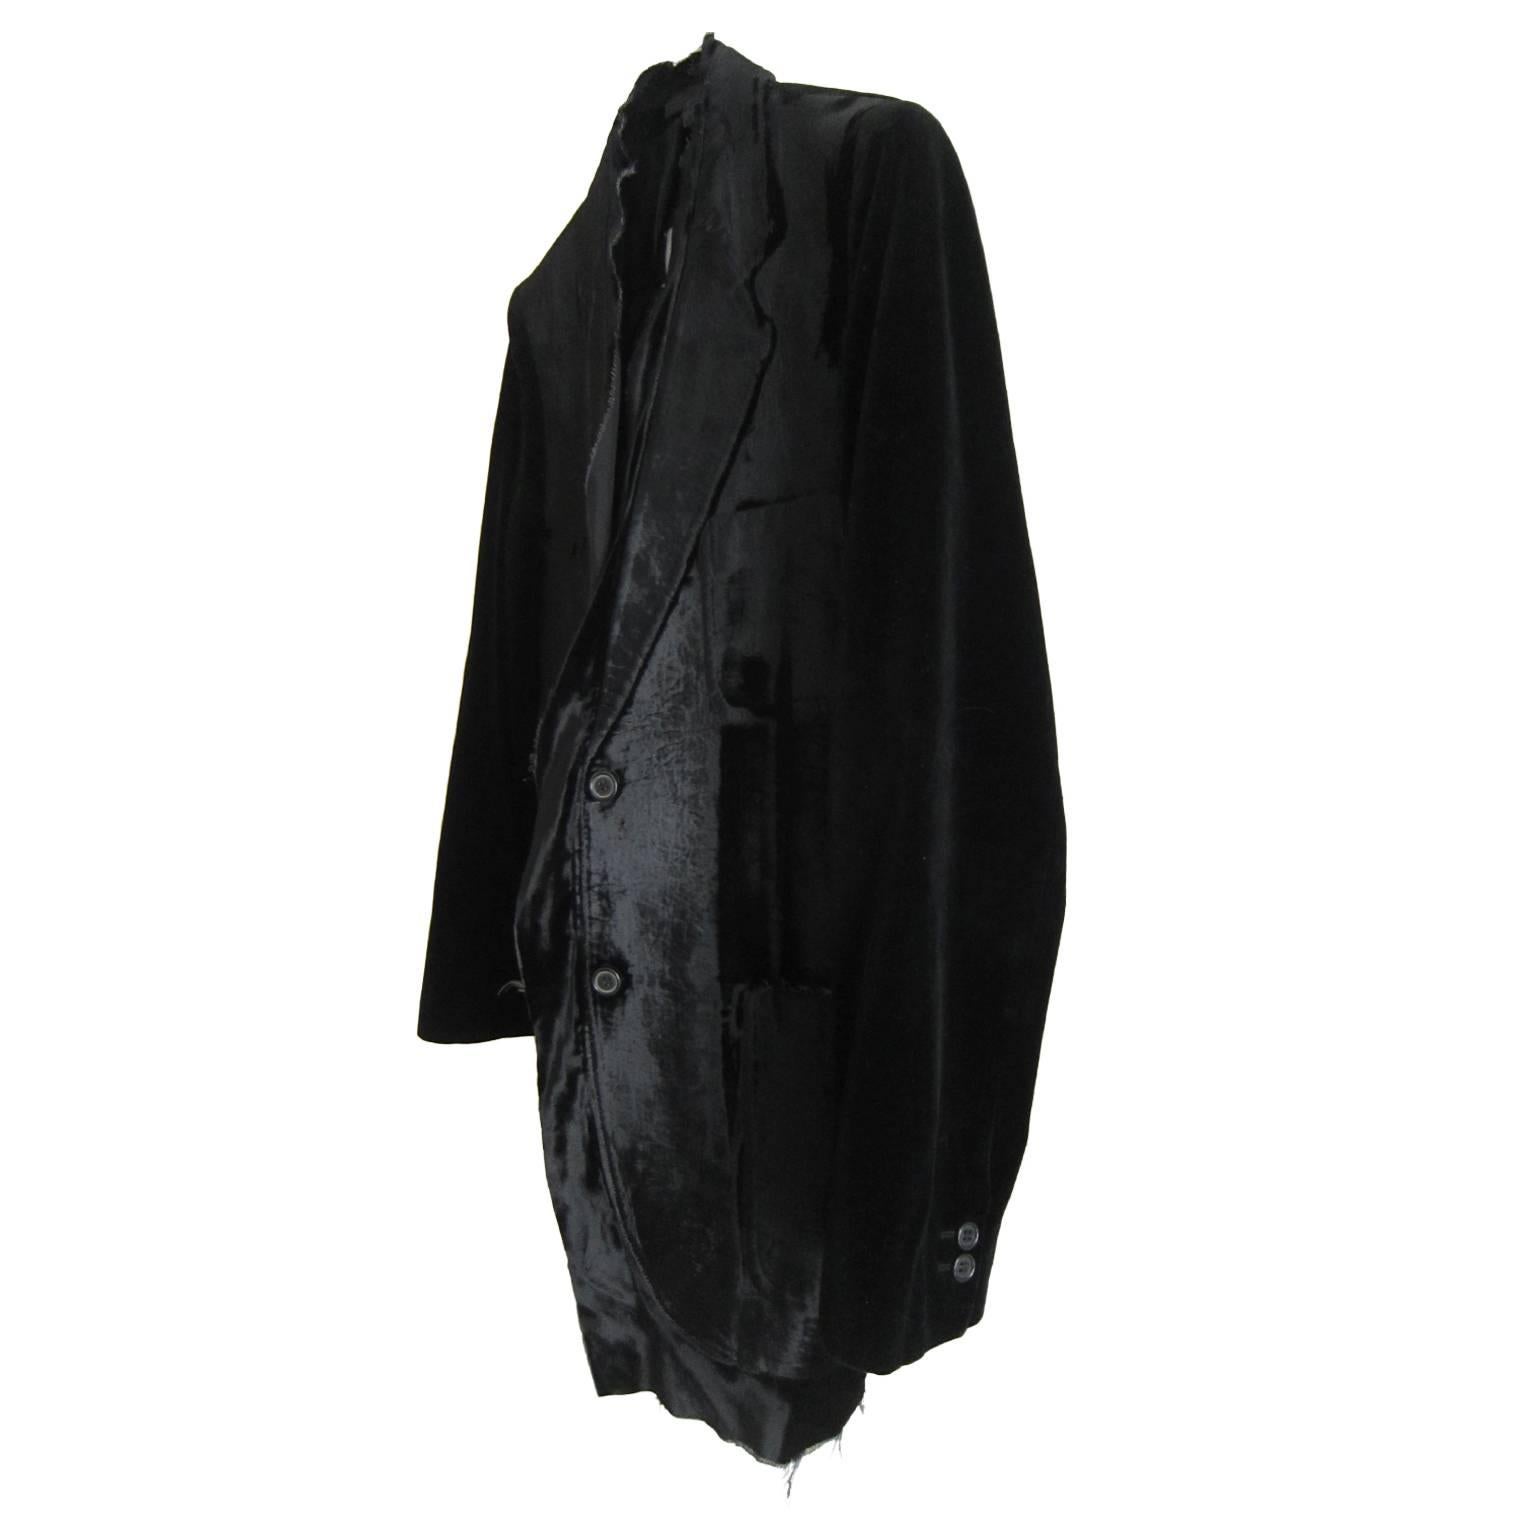 Martin Margiela true master, key piece black velvet jacket from collection 2001. 
This artistically crafted jacket has such unique technic as if one jacket is pressed and hidden between materials - Amazing piece.
Made in Italy. Original size 44 it 